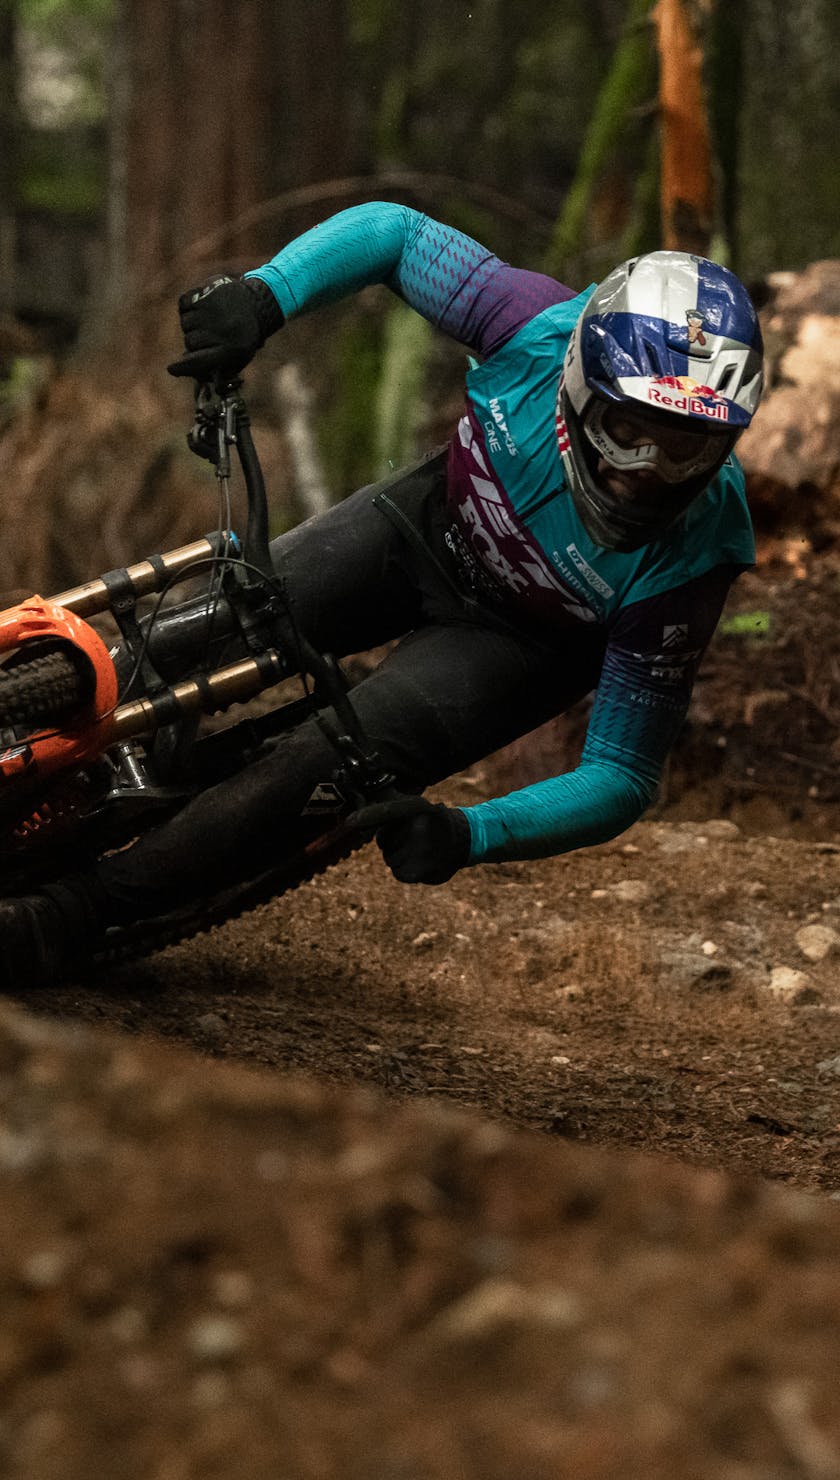 Special Projects - Richie Rude riding the Yeti Cycles DH bike